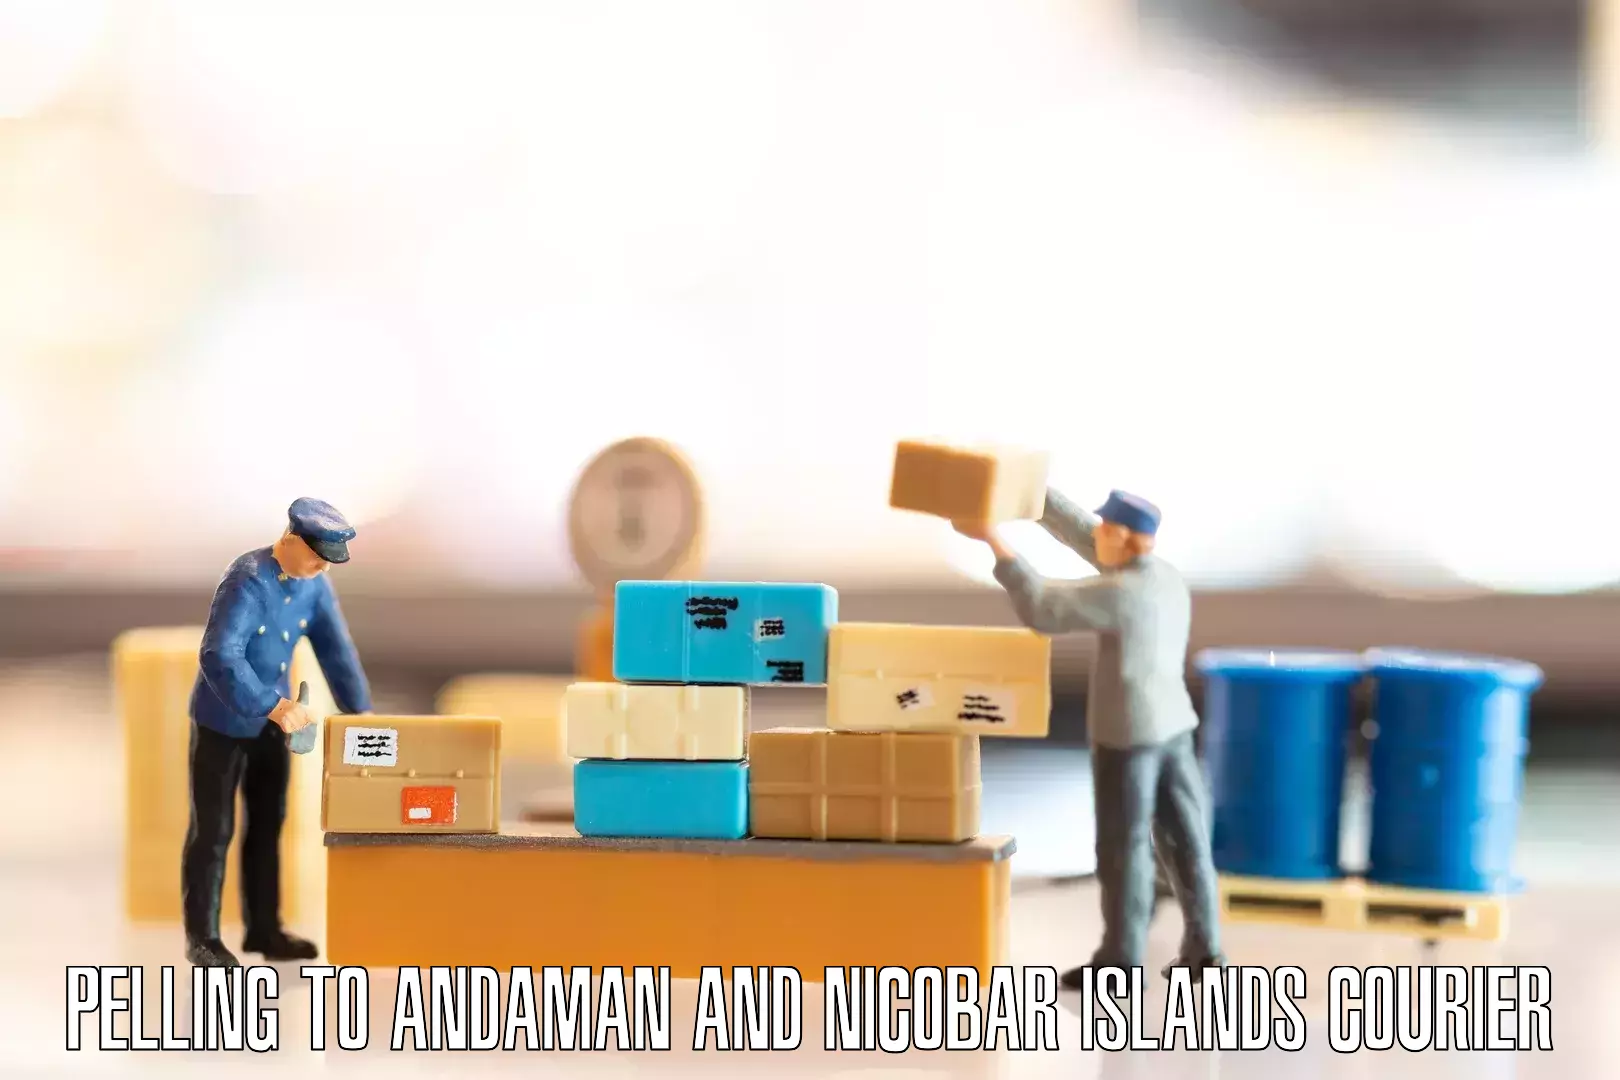 Furniture relocation experts Pelling to Andaman and Nicobar Islands